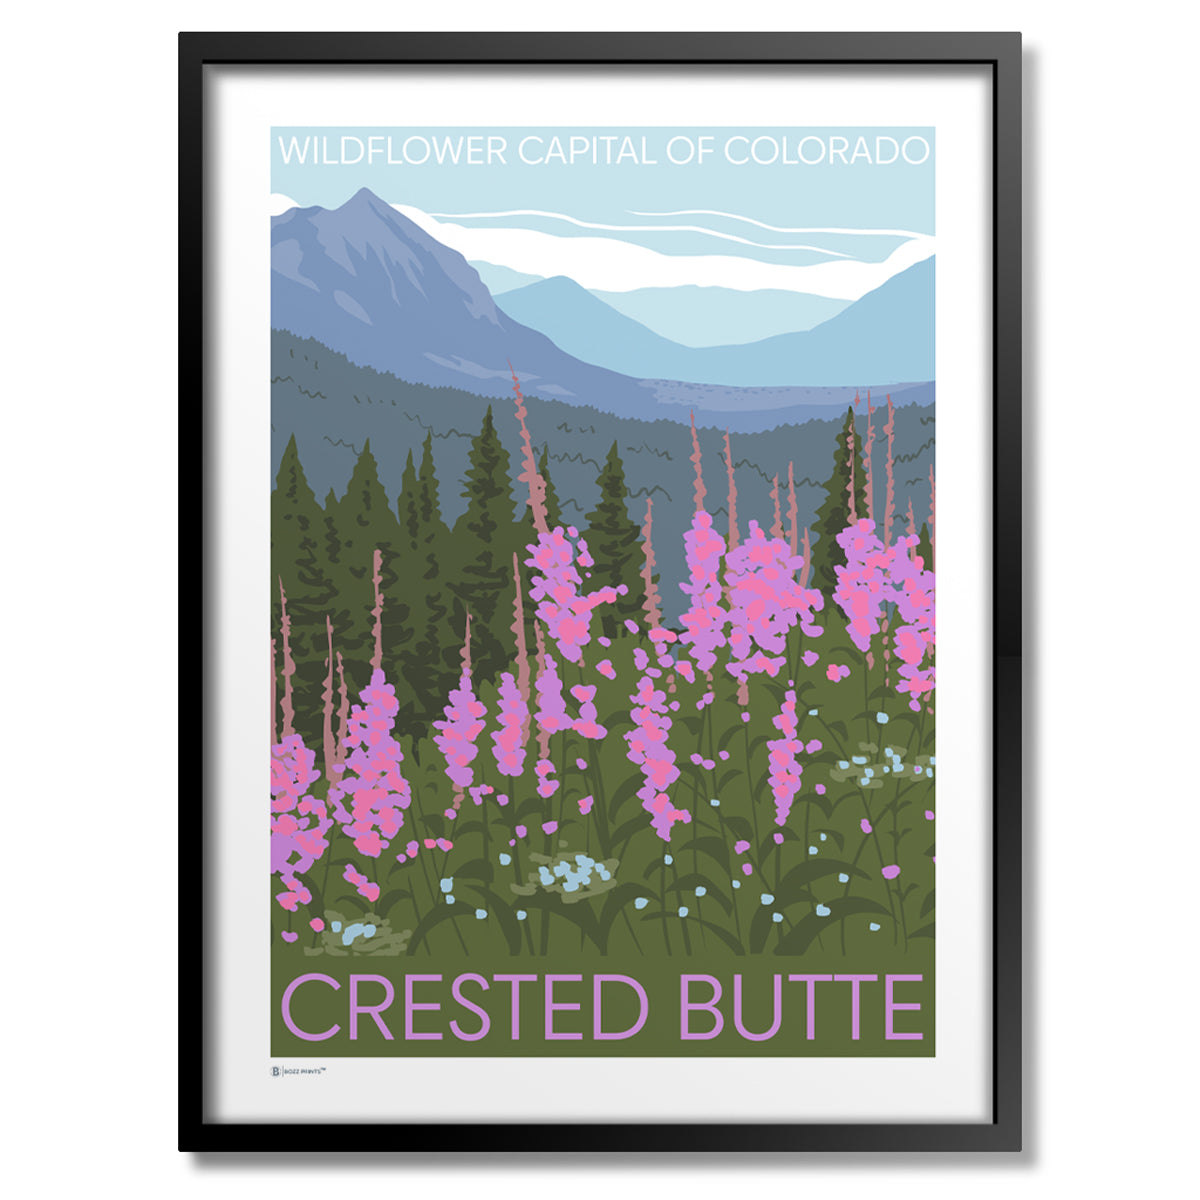 Crested Butte Wildflower Capitol Print - Bozz Prints